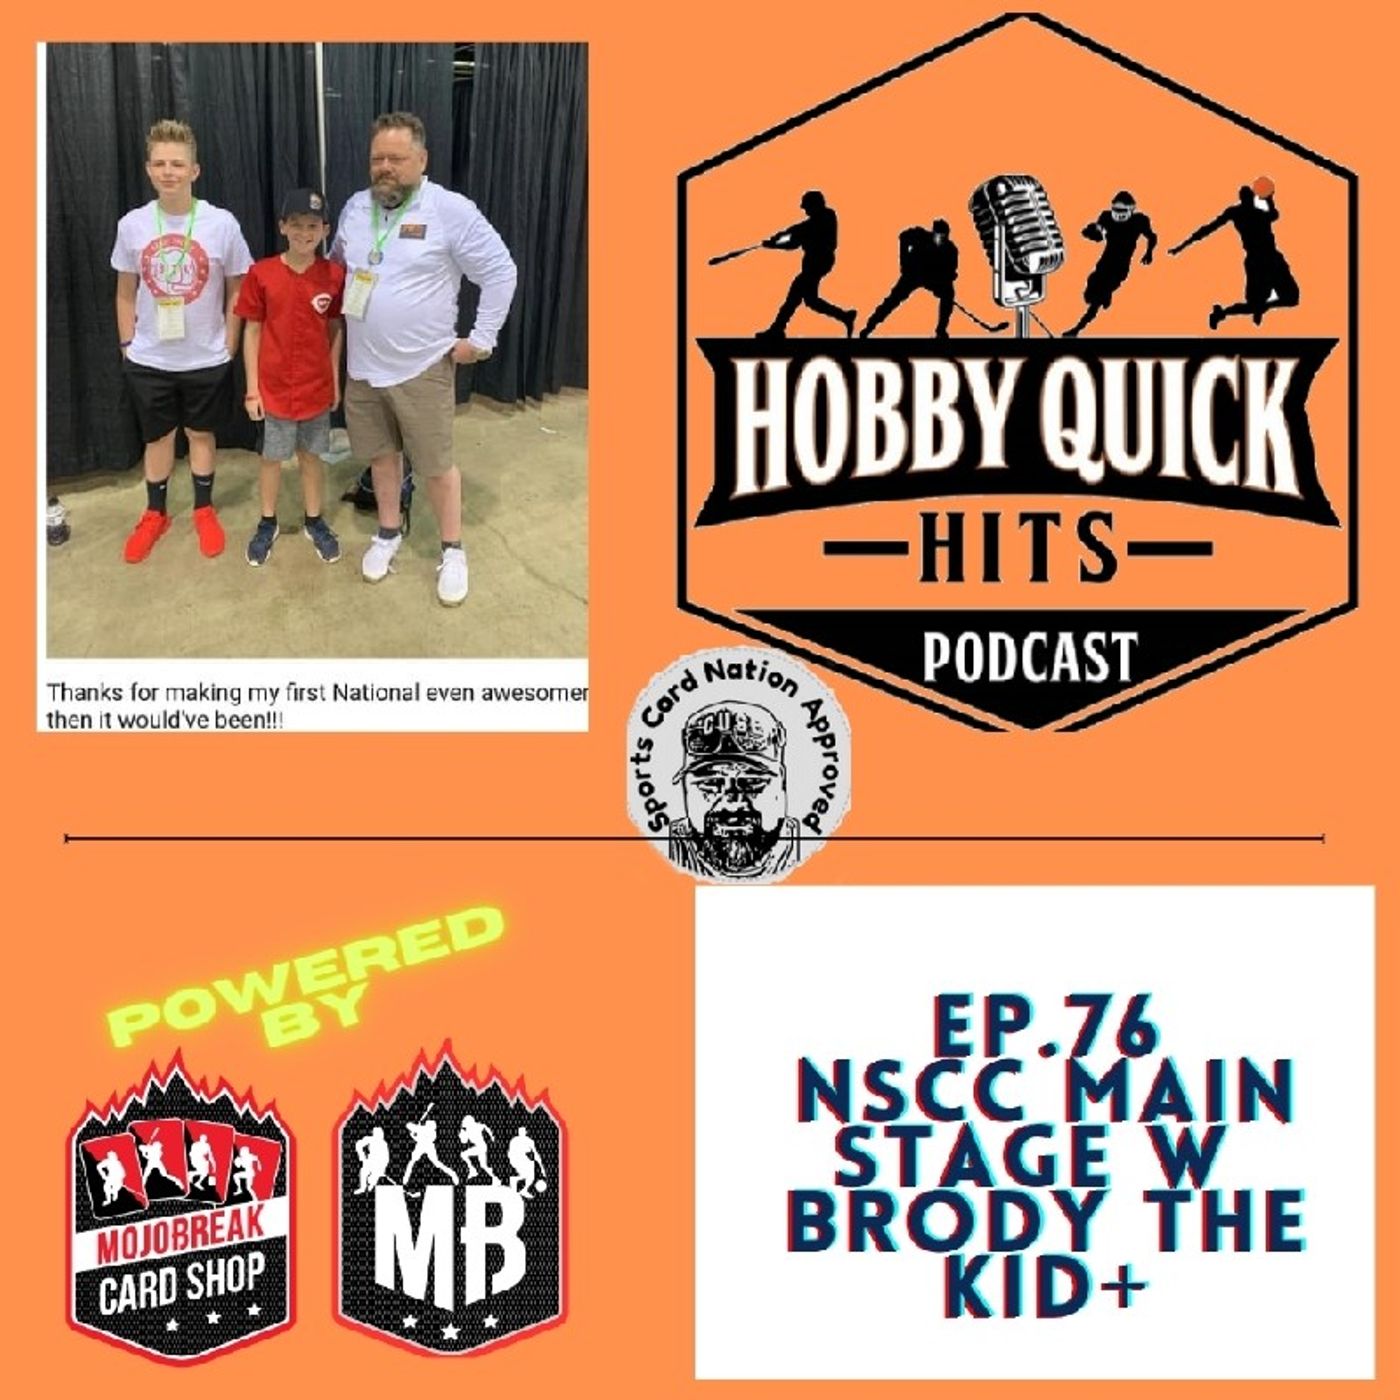 Episode image for Hobby Quick Hits Ep.76 Live from the NSCC Main Stage w/Brody the Kid